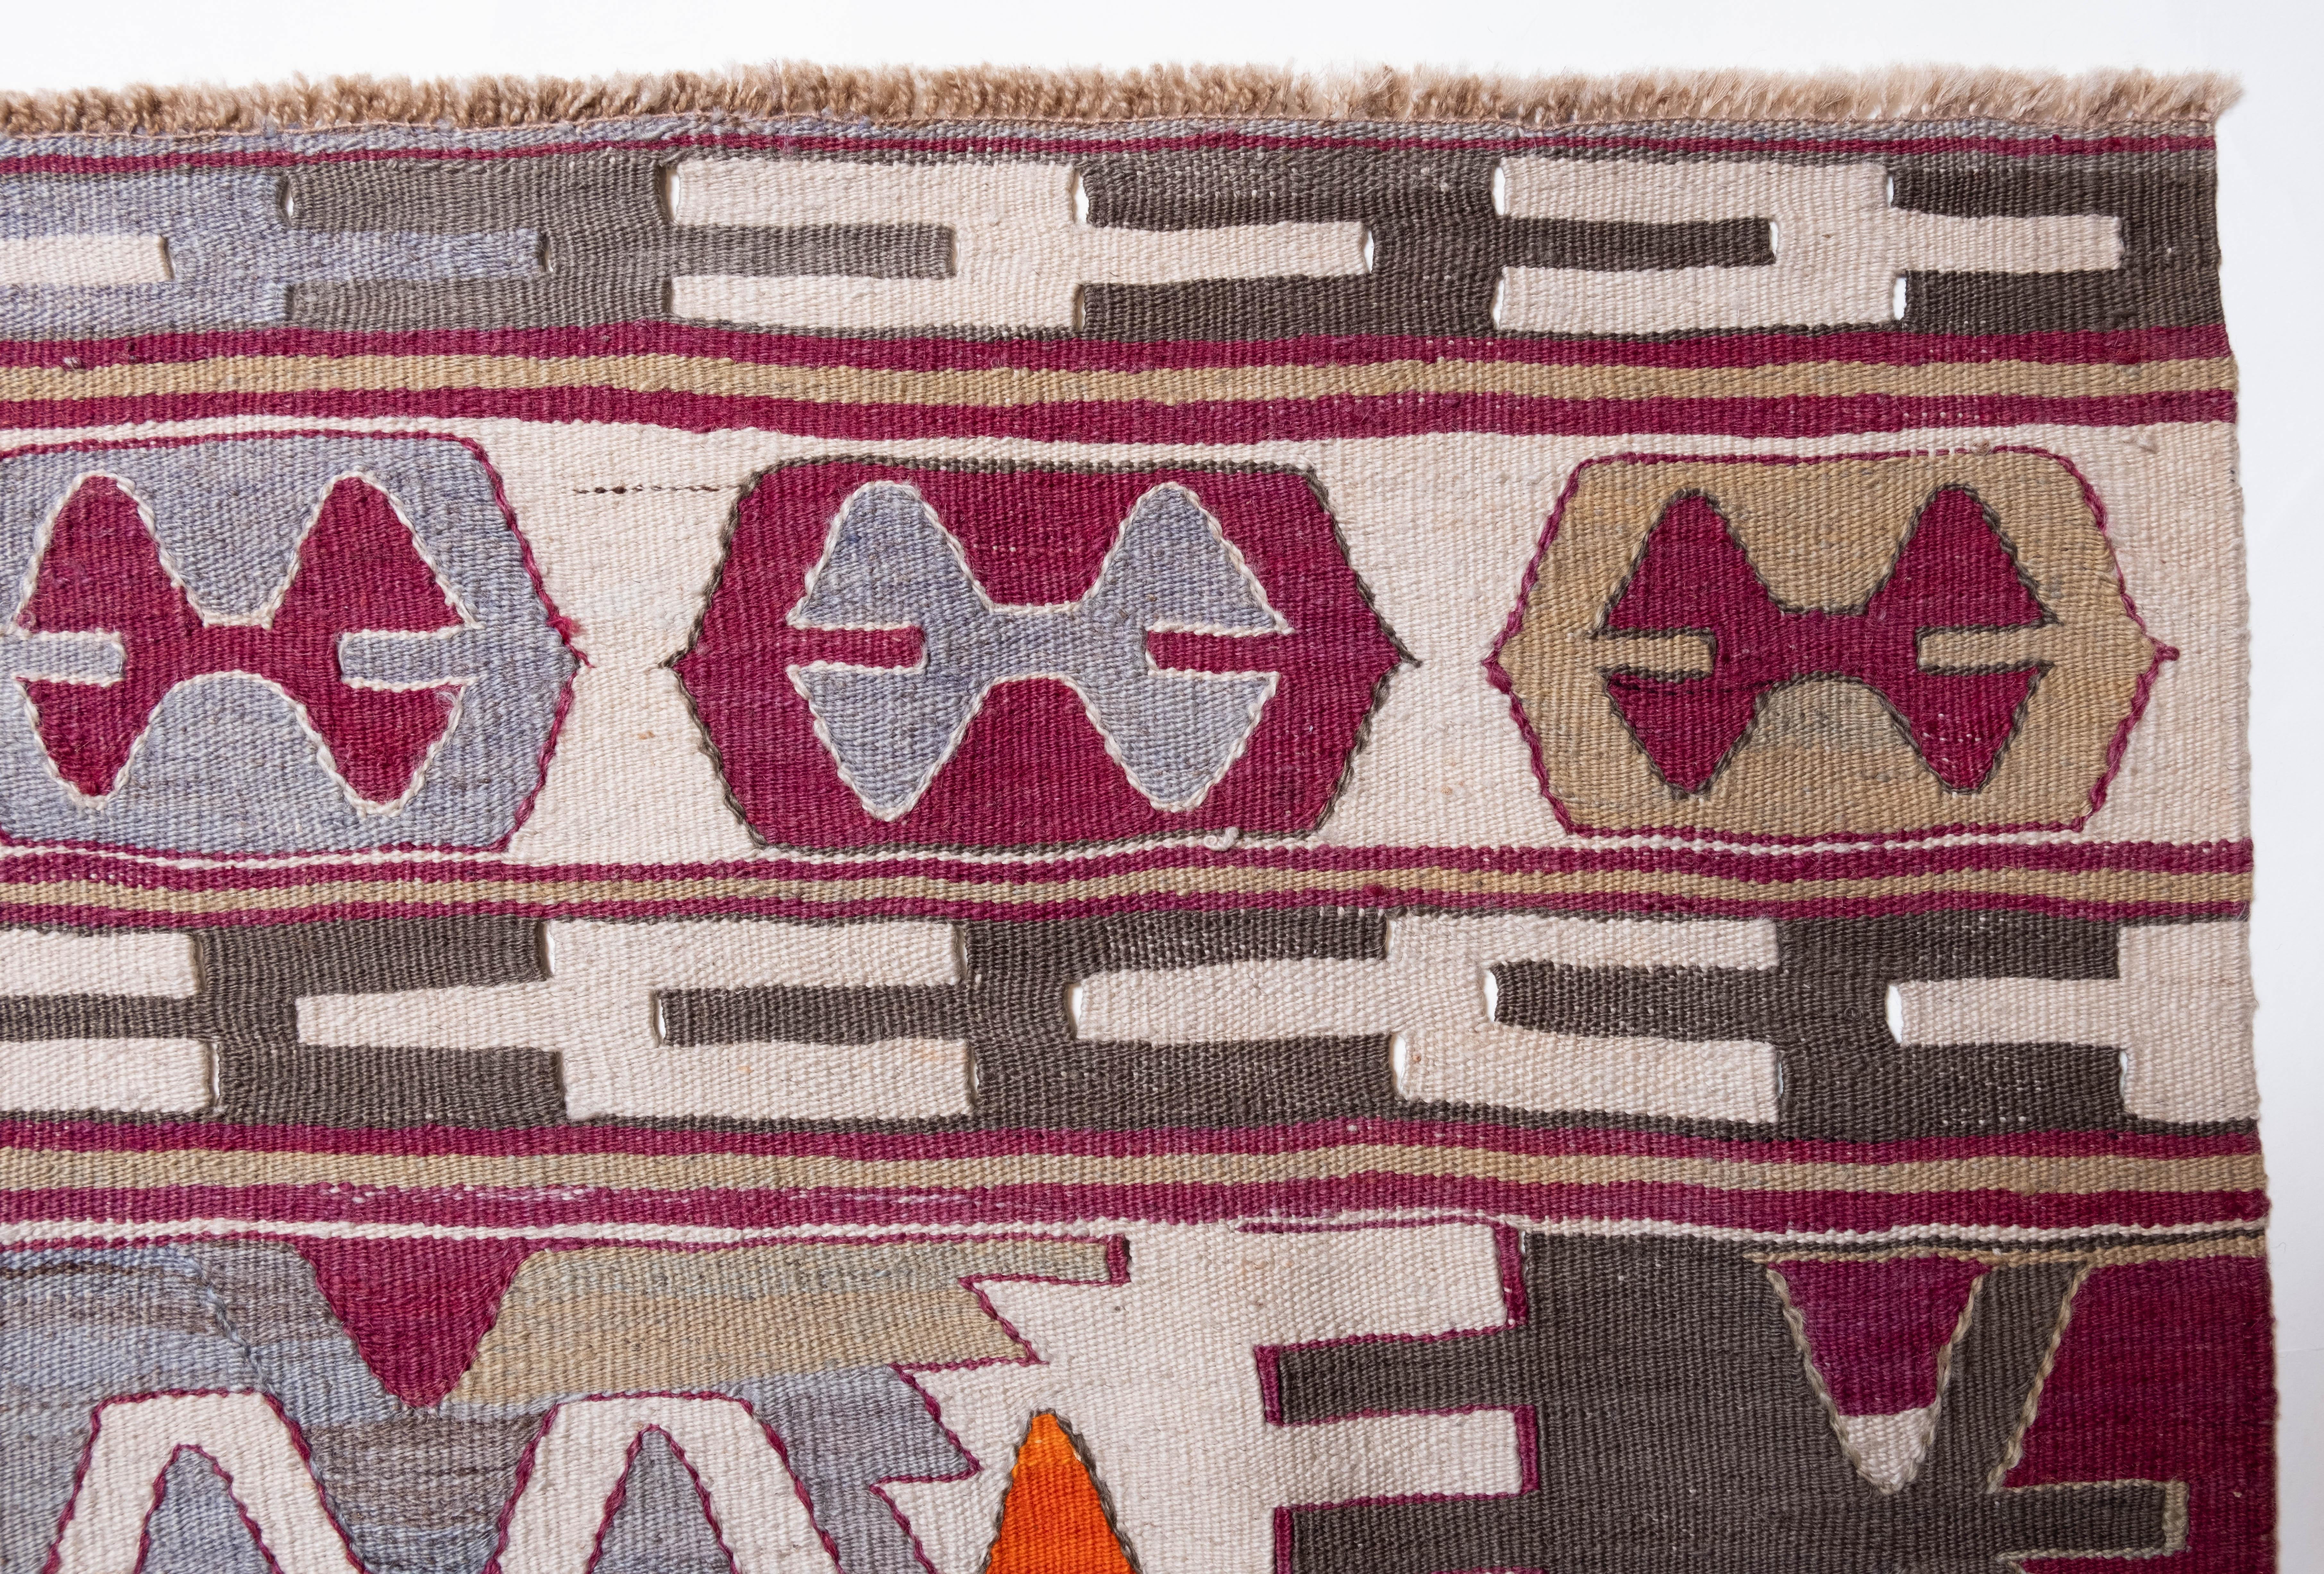 This is Central Anatolian Antique Kilim from the Konya region with a rare and beautiful color composition.

This highly collectible antique kilim has wonderful special colors and textures that are typical of an old kilim in good condition. It is a